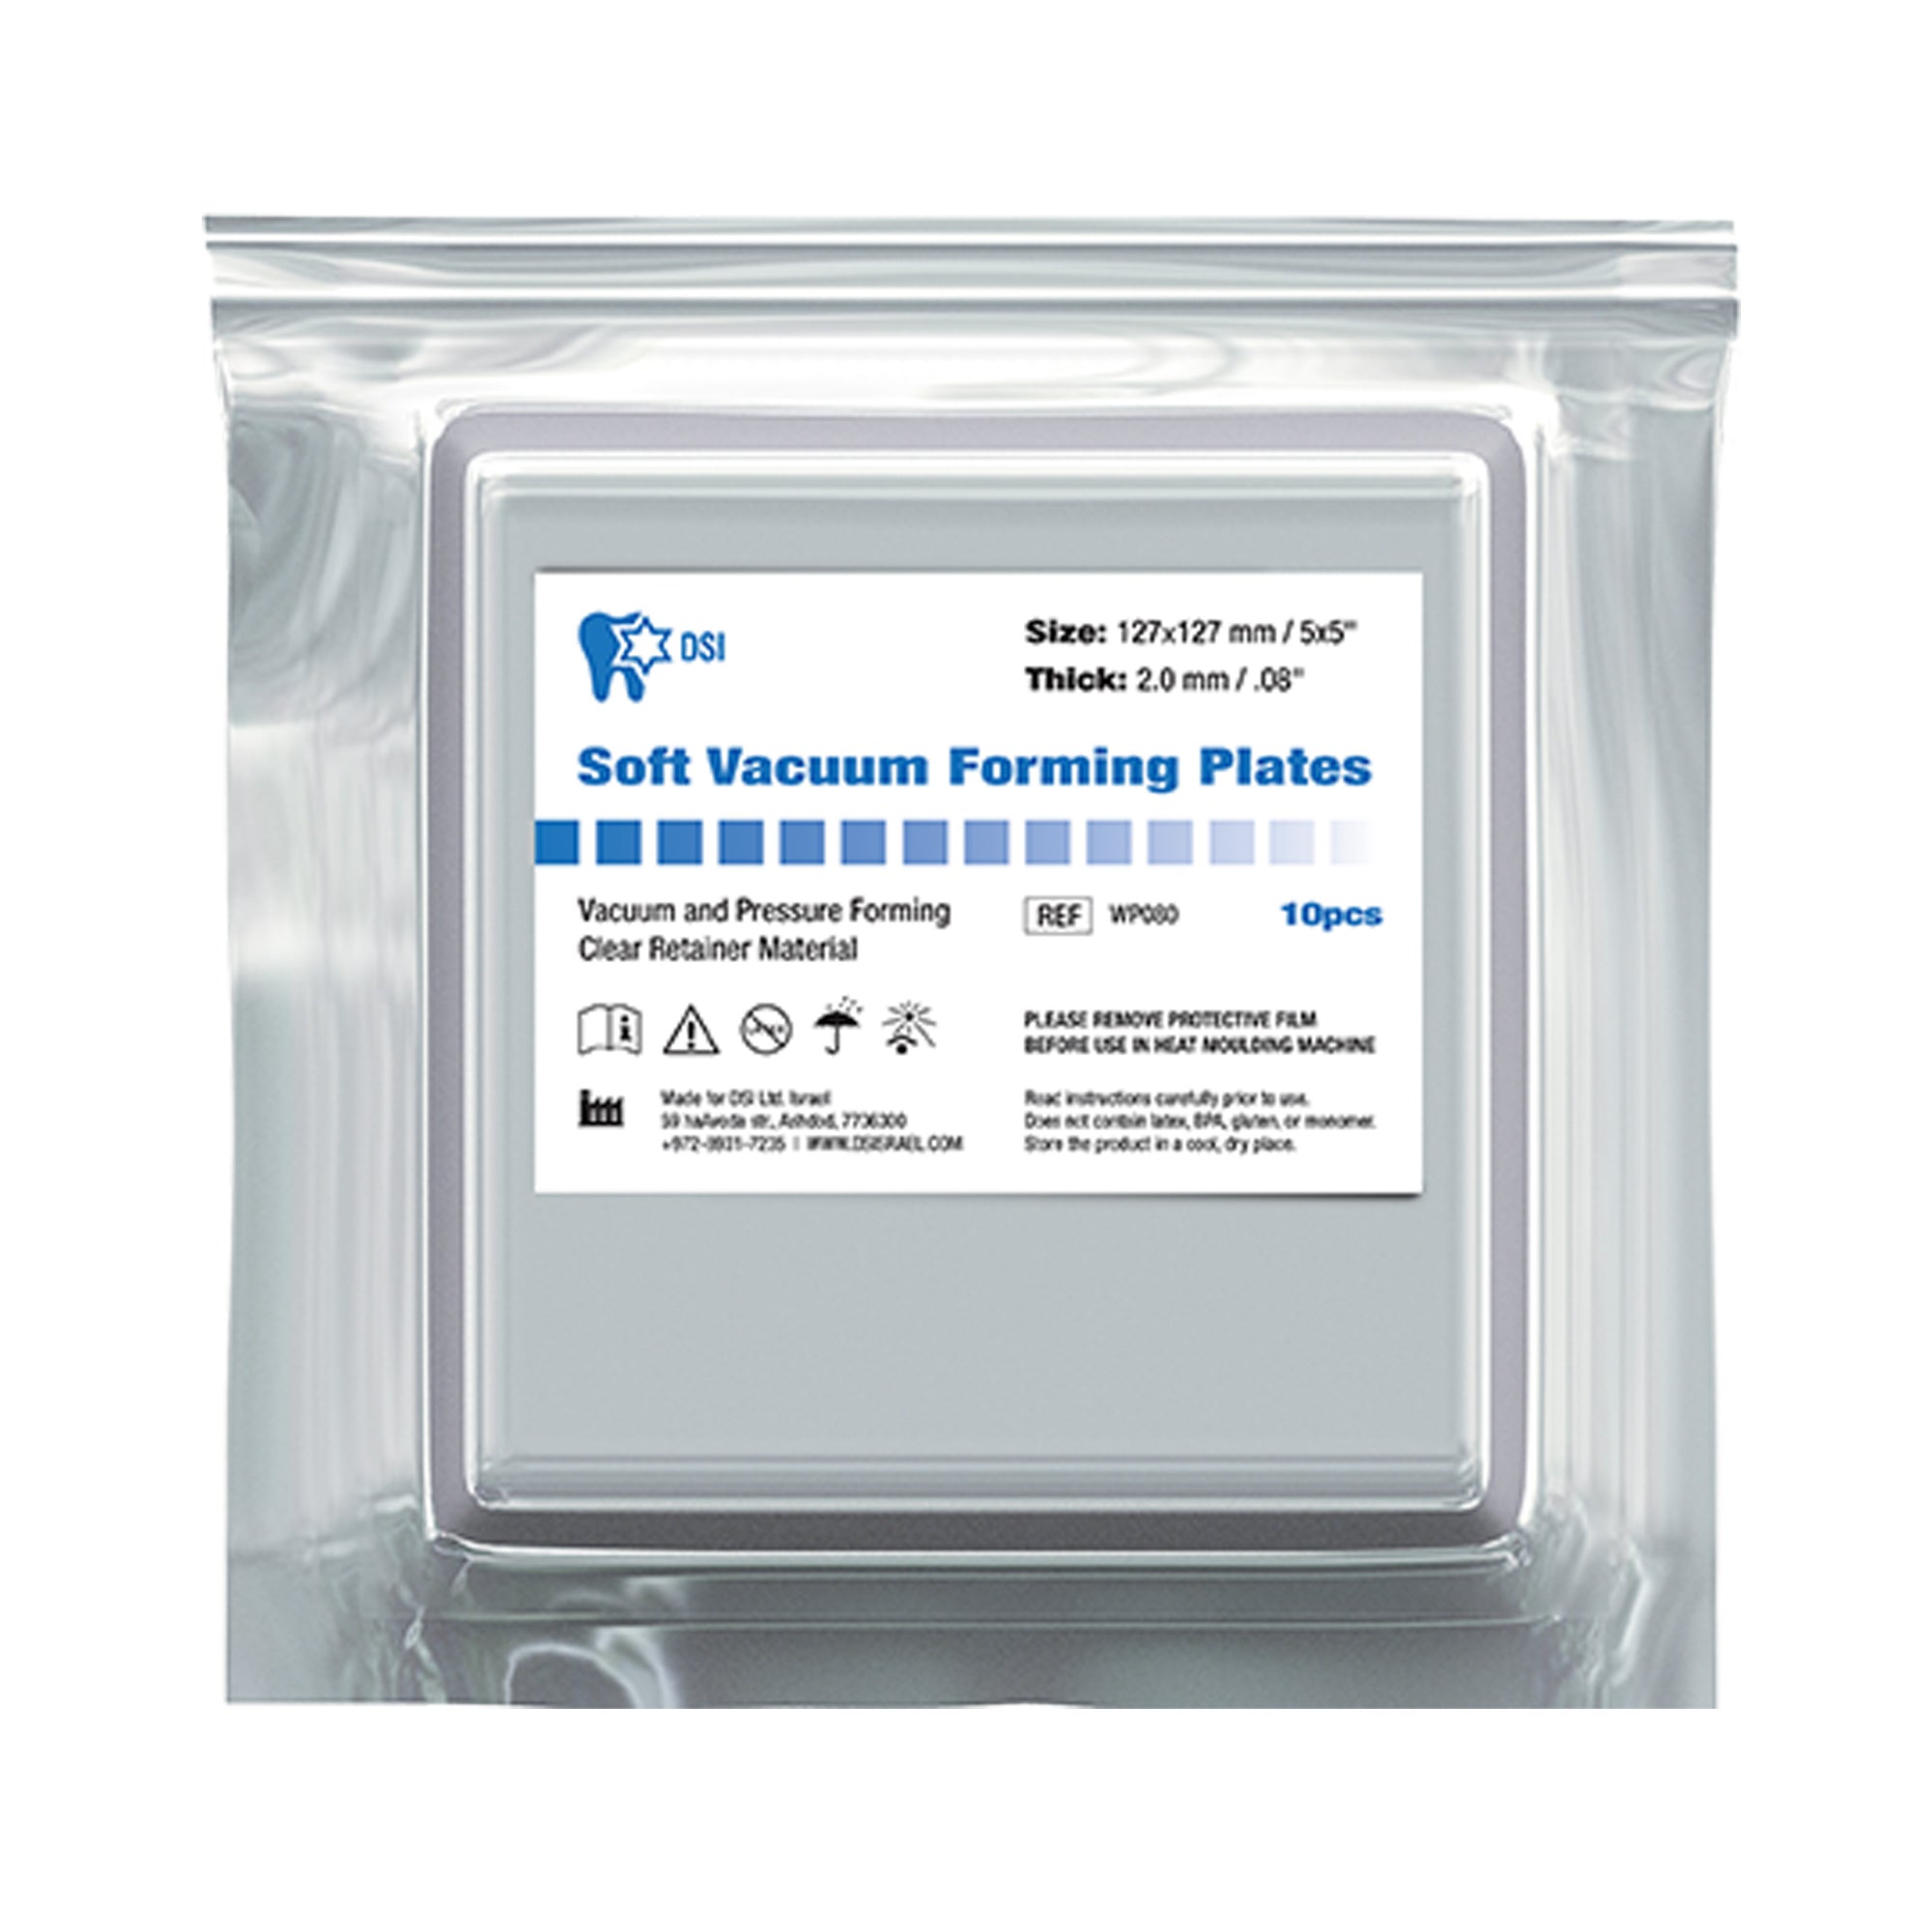 DSI Soft Vacuum Forming Plates For Whitening Trays 125x125mm